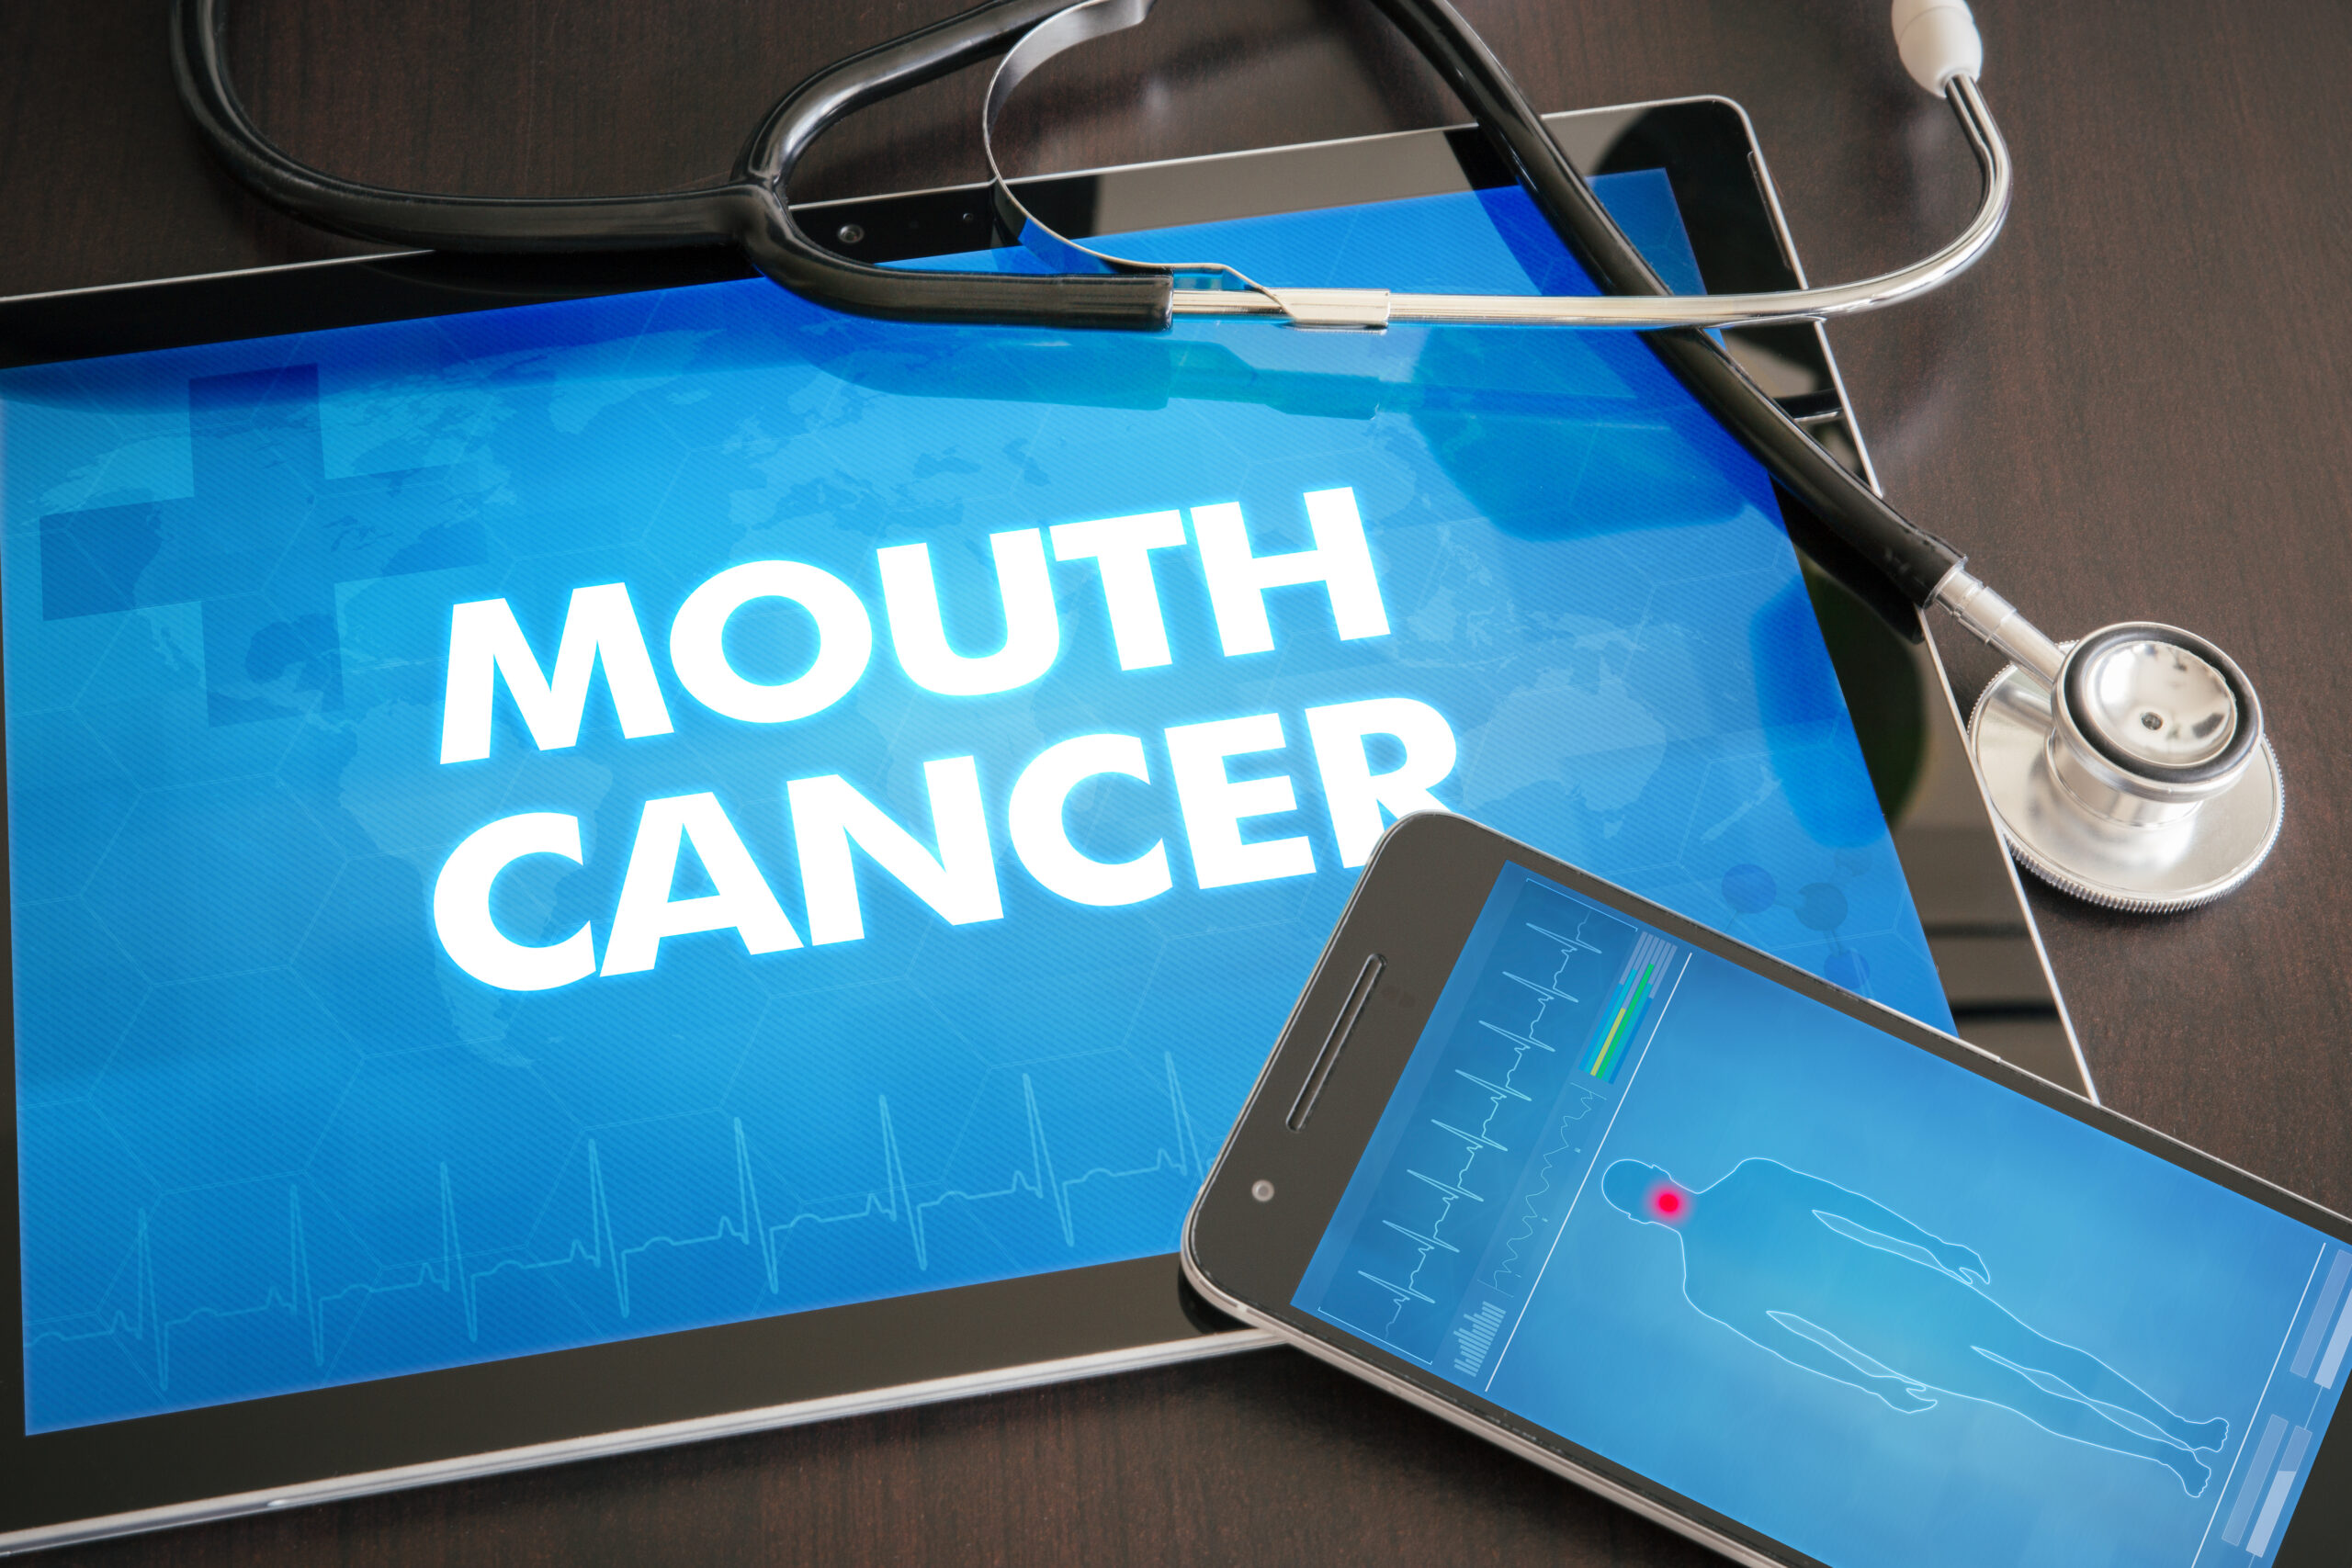 Mouth cancer (cancer type) diagnosis medical concept on tablet screen with stethoscope.